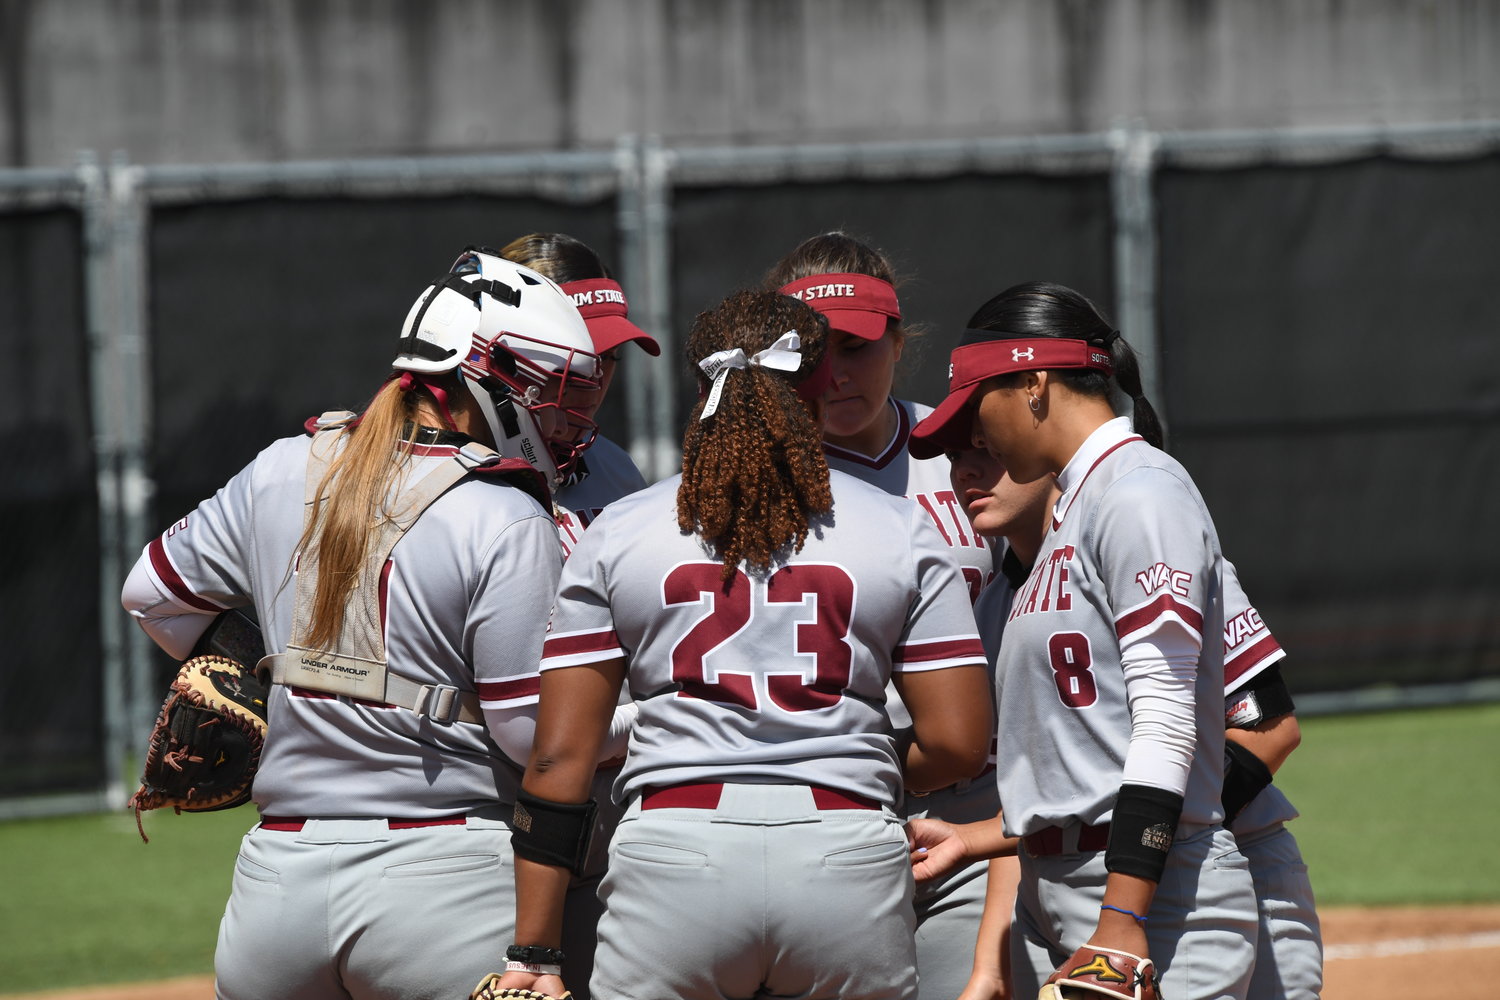 Photo courtesy of NMSU – The New Mexico State University softball lost its opening game in the WAC tourney but rebounded to advance to the championship round where they lost in the opening game to host Seattle U.